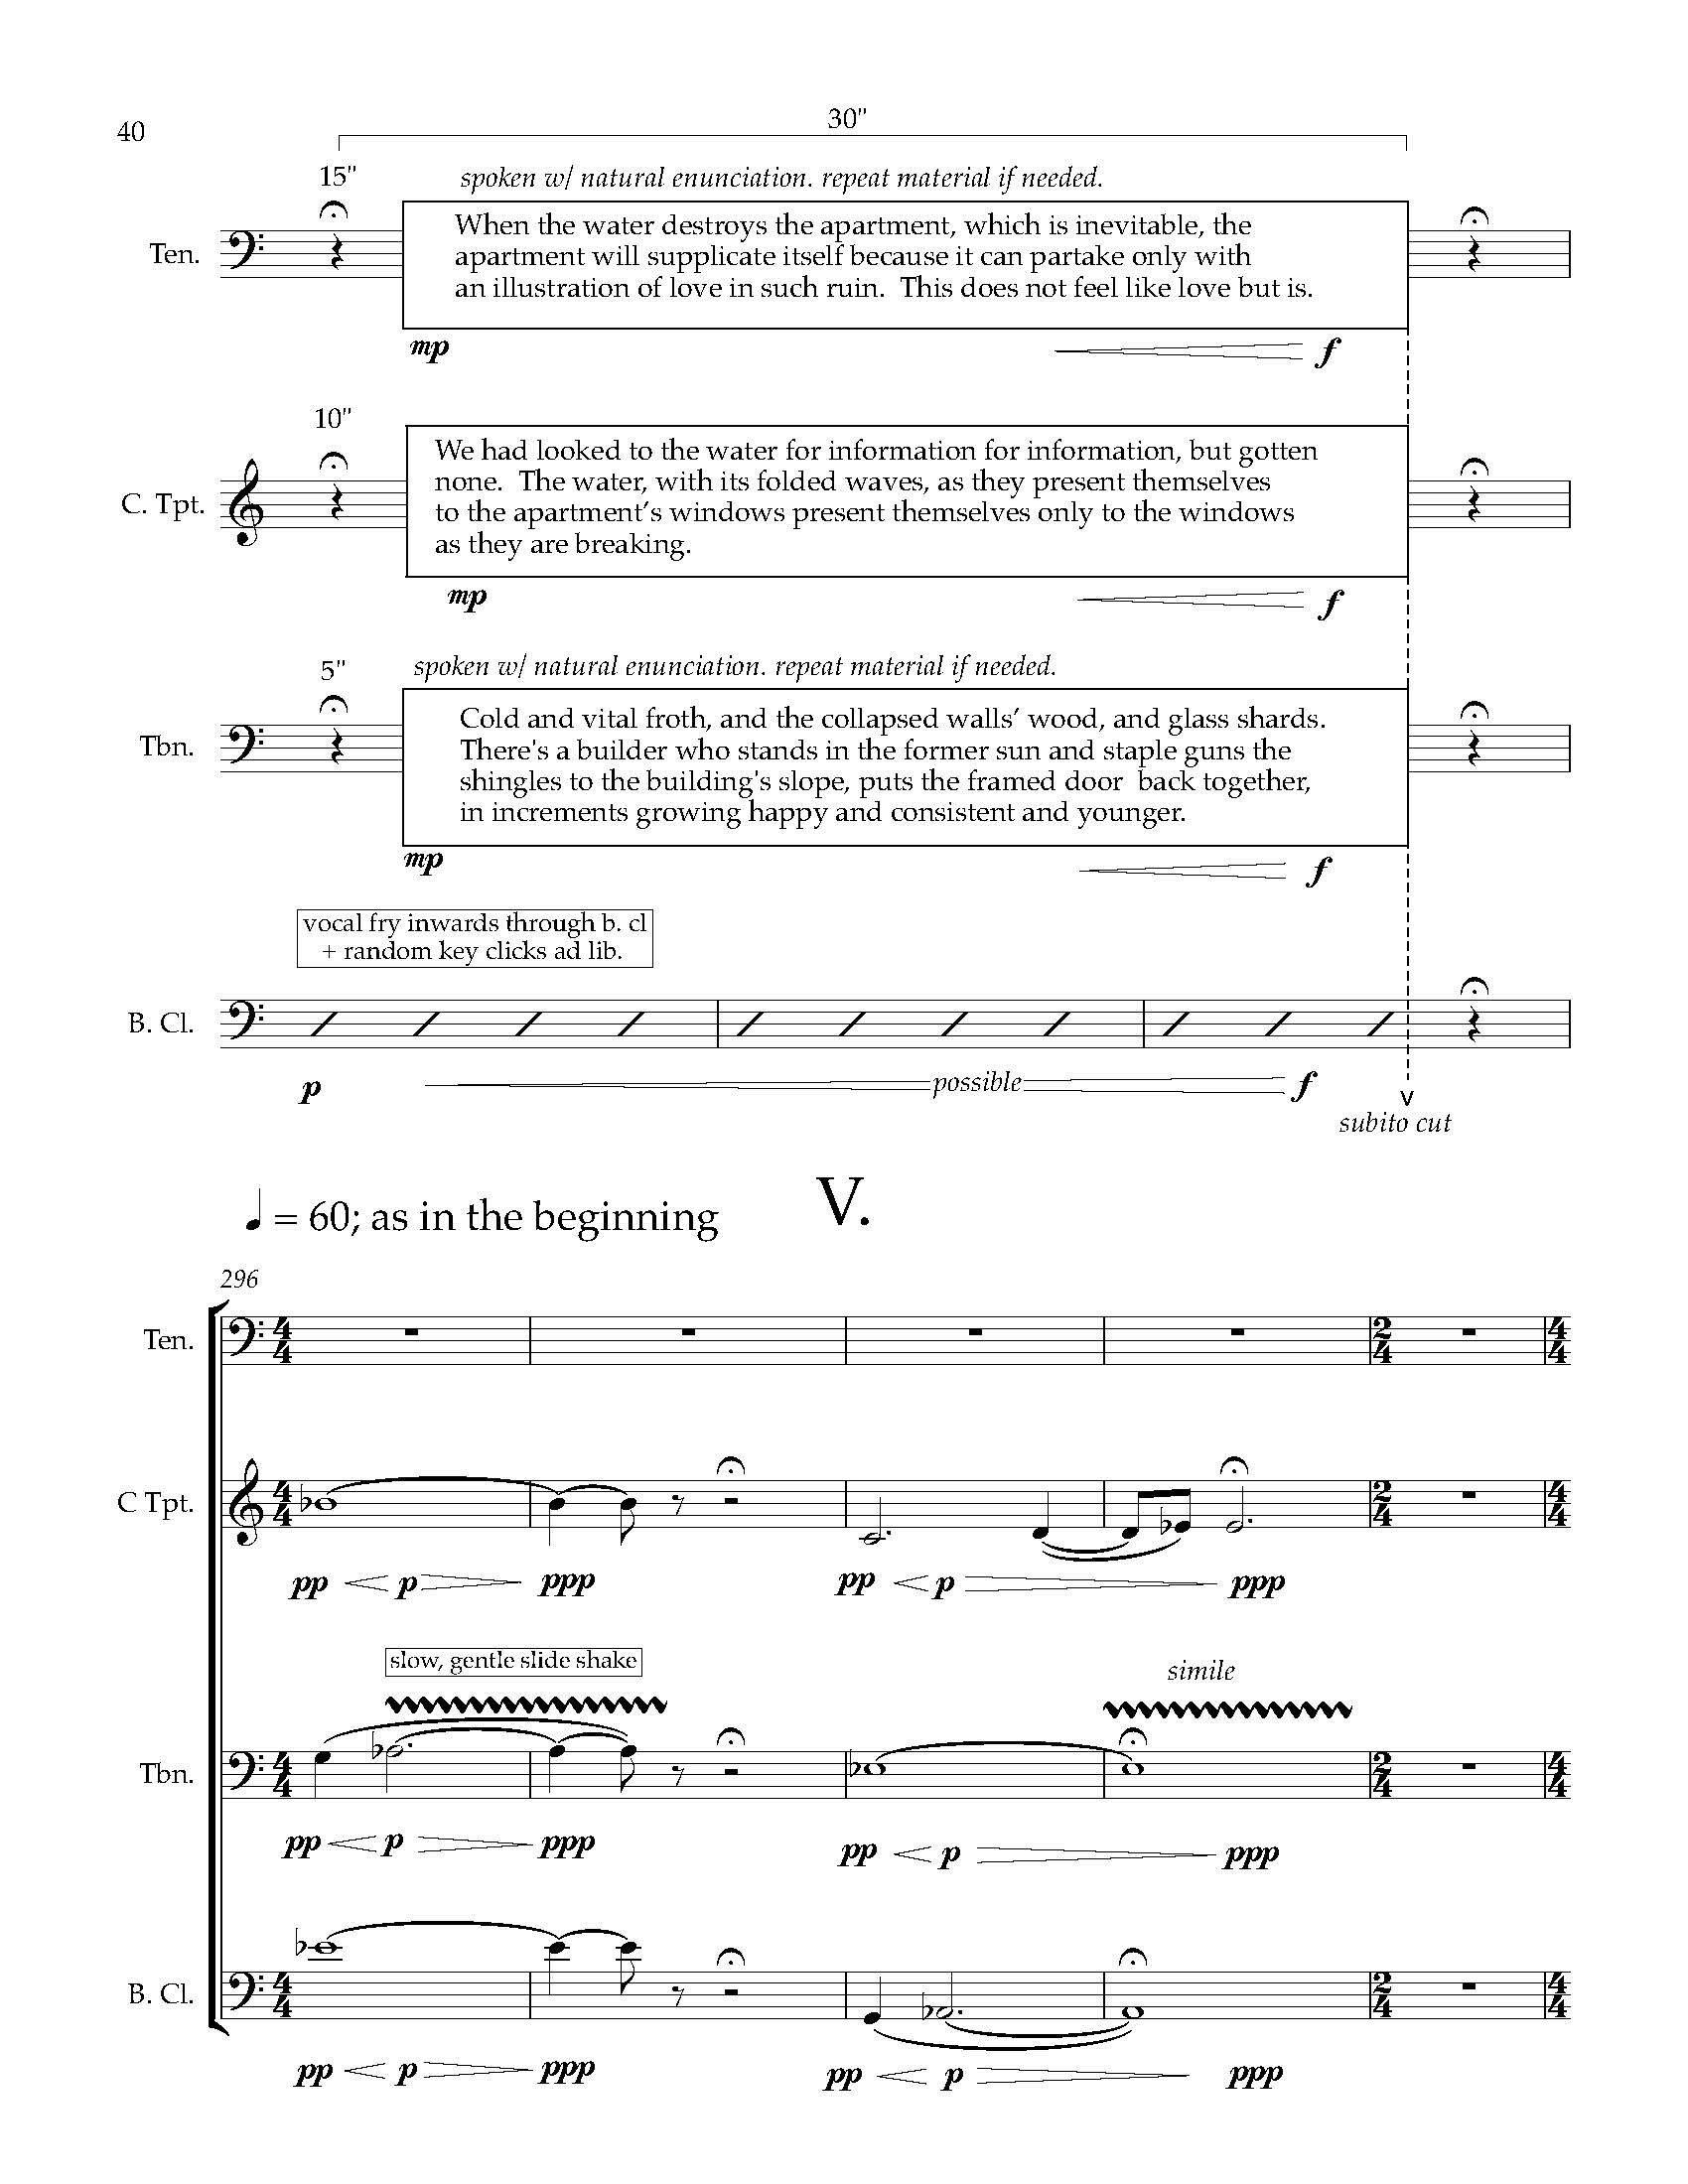 Many Worlds [1] - Complete Score_Page_49.jpg